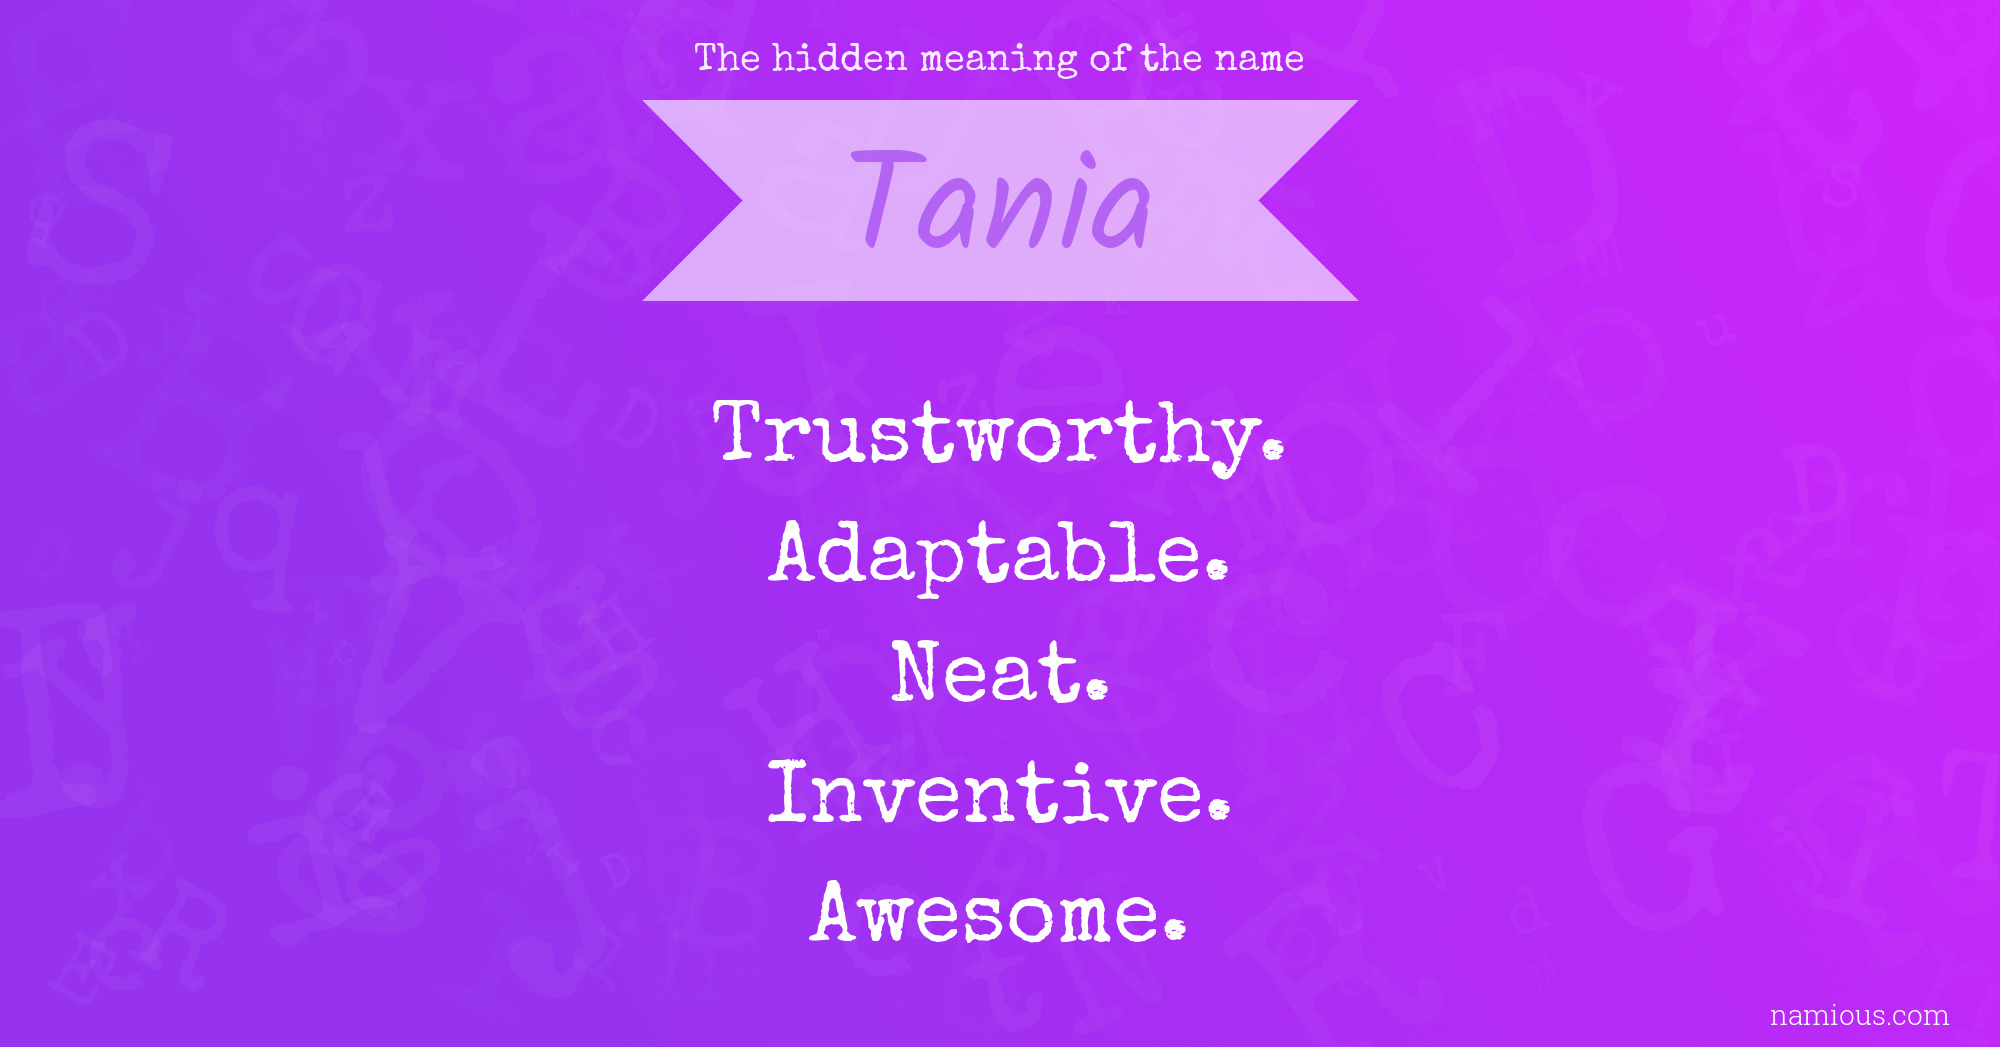 The hidden meaning of the name Tania